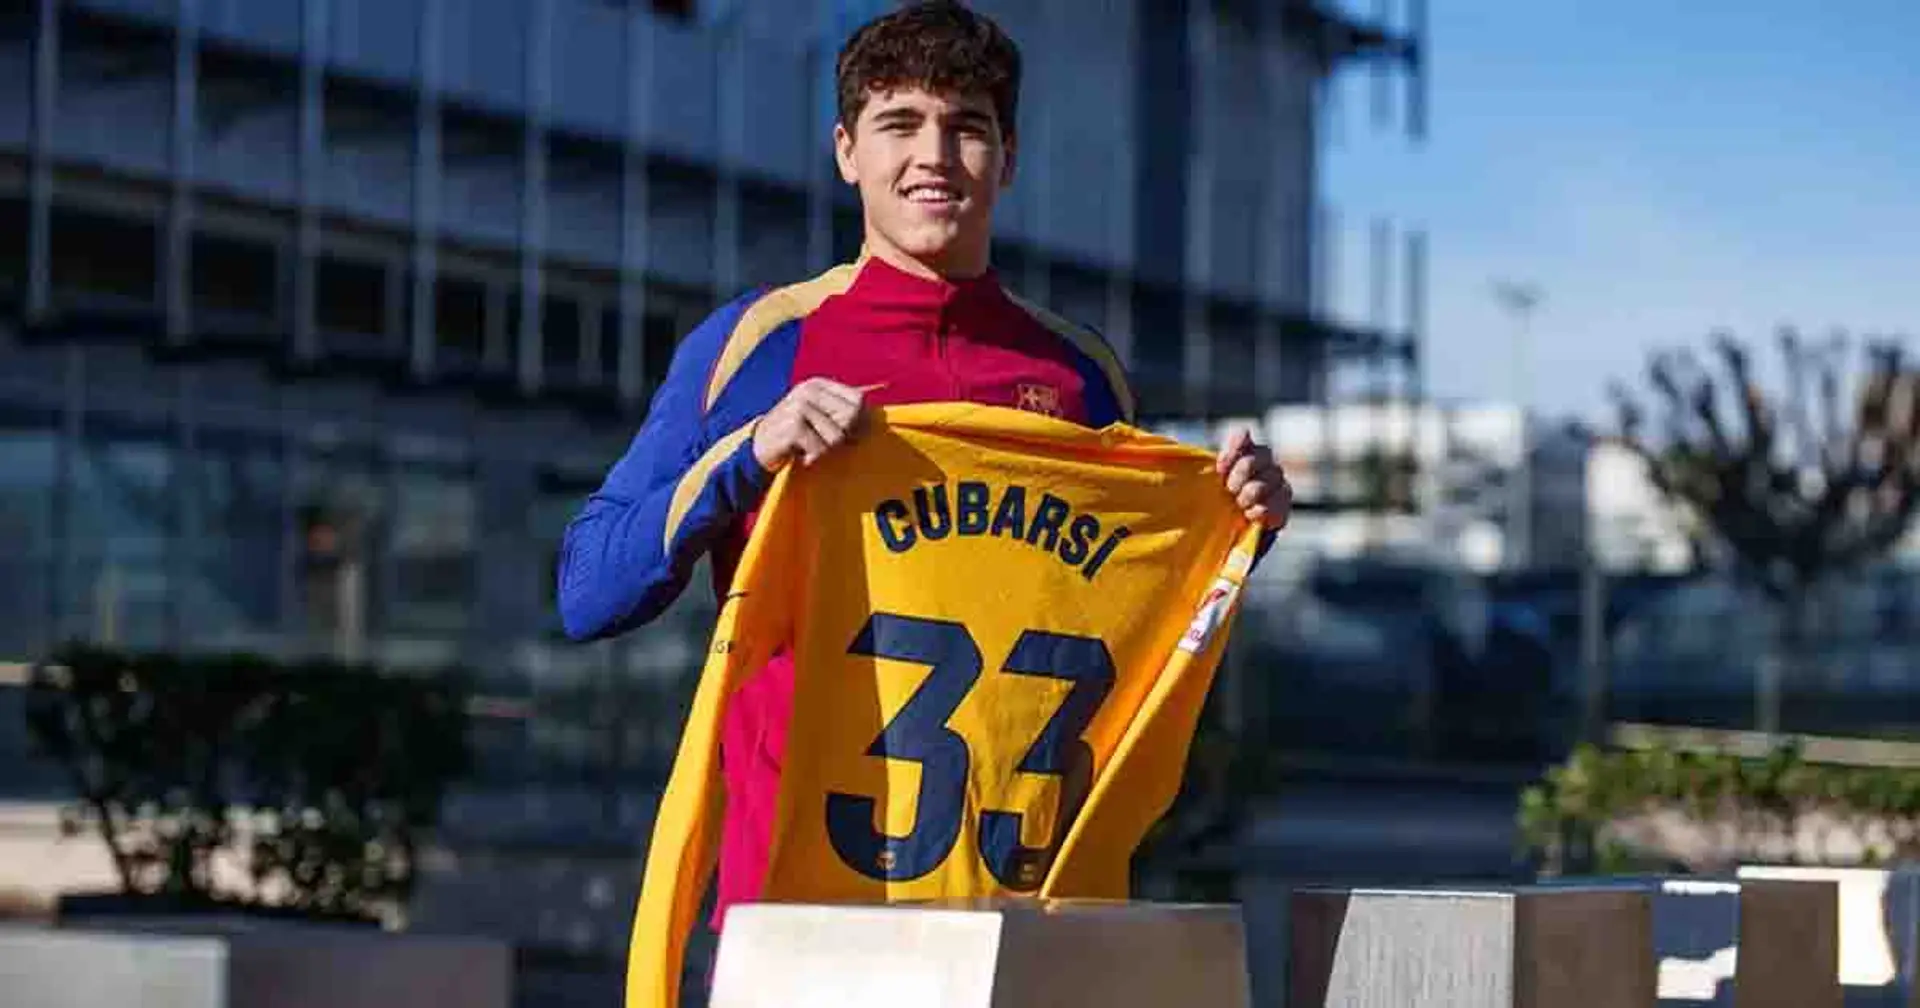 'One of the best weeks': Cubarsi opens up on making La Liga debut